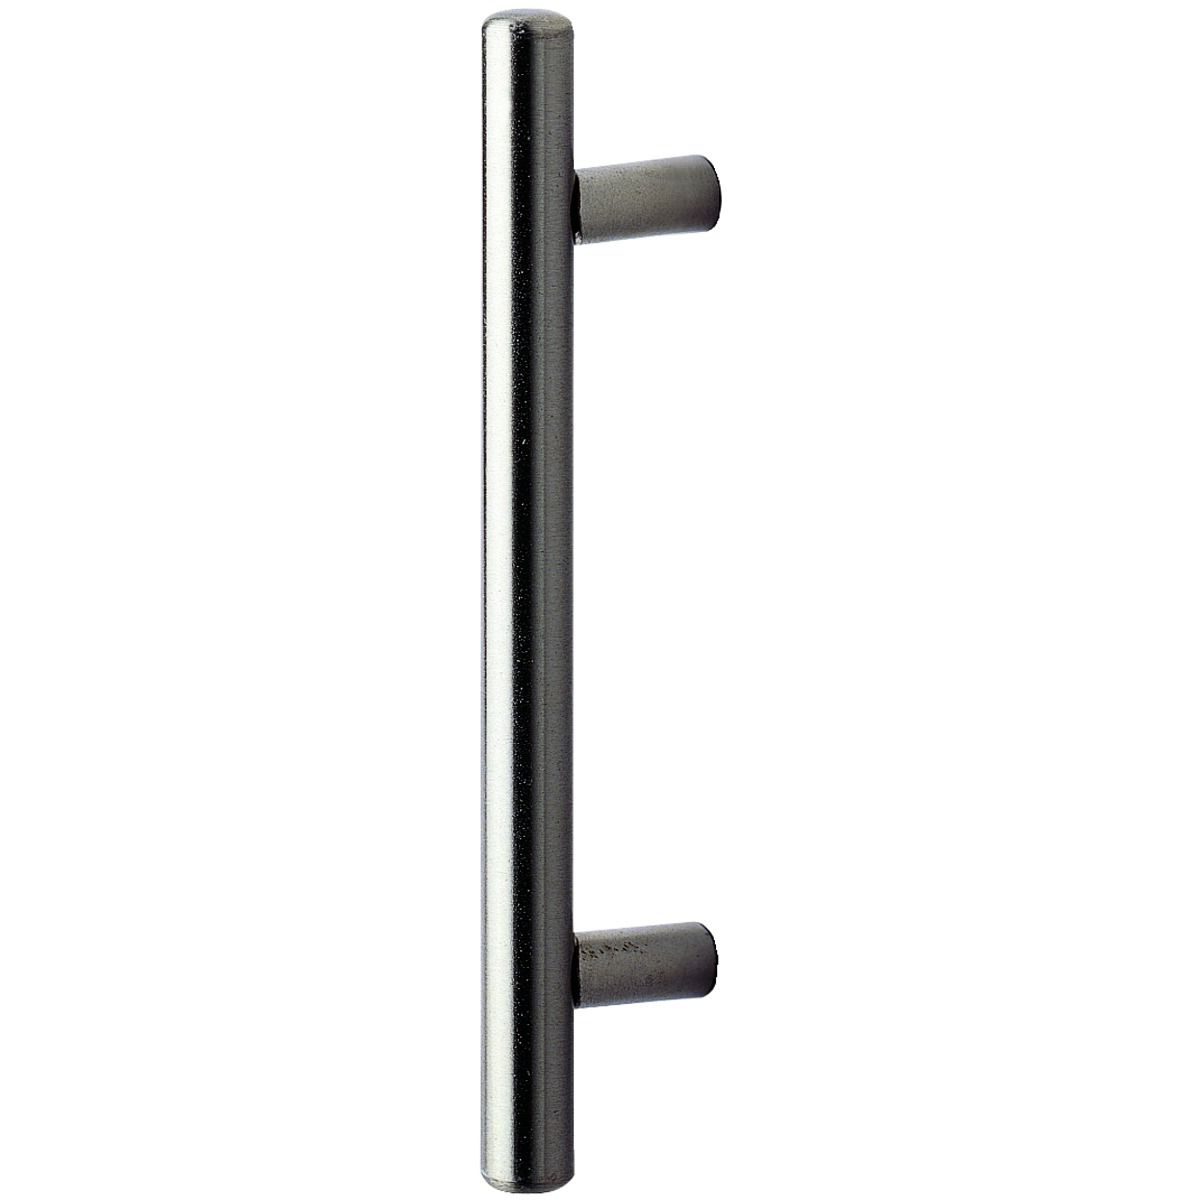 Wickes Stainless Steel Satin Nickel Bar Handle for